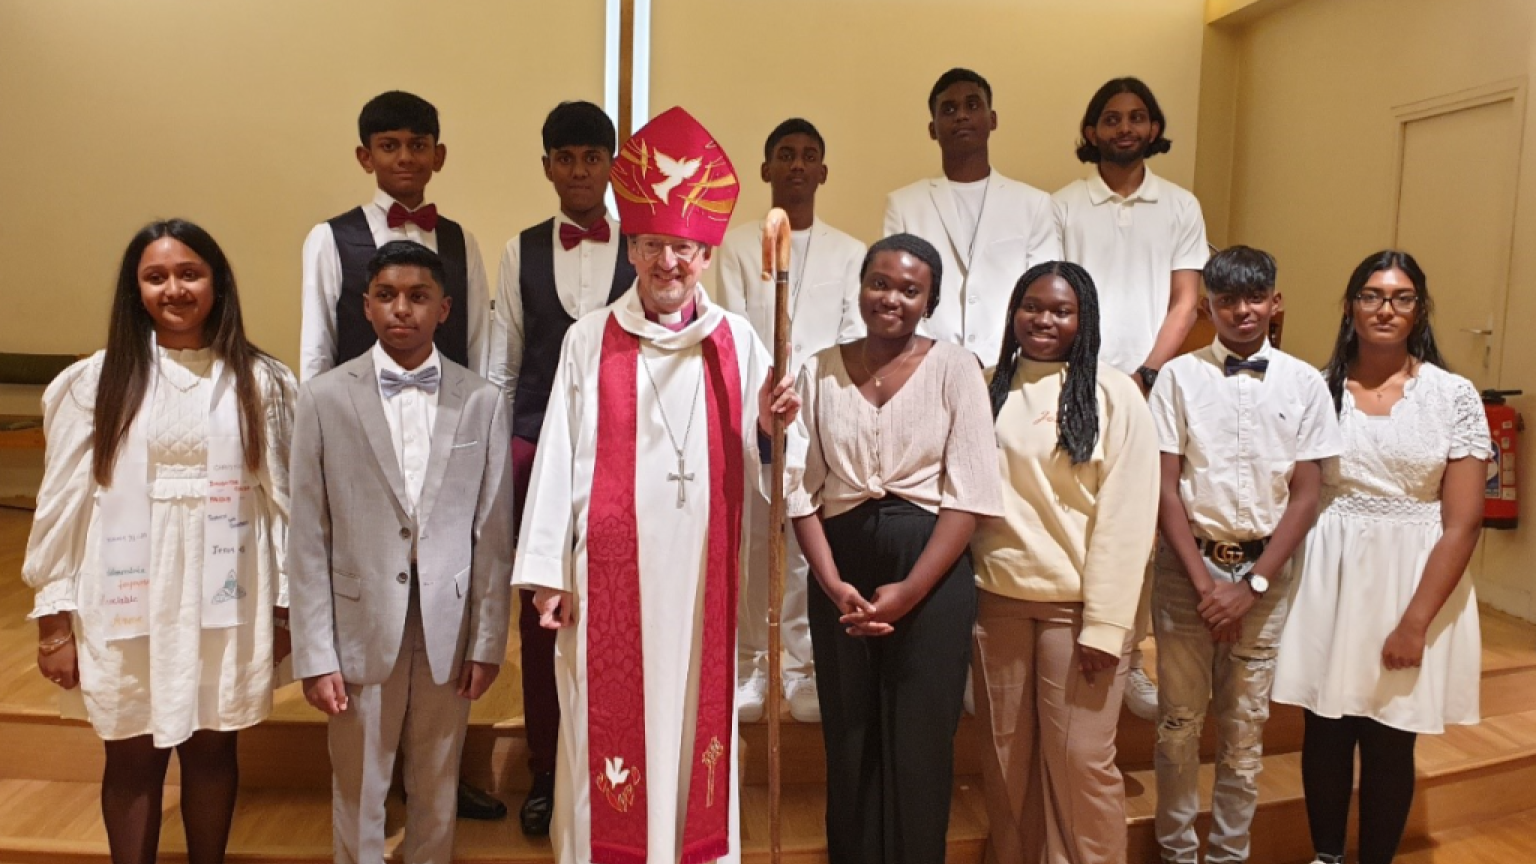 Bishop Robert with a group of young Christians.